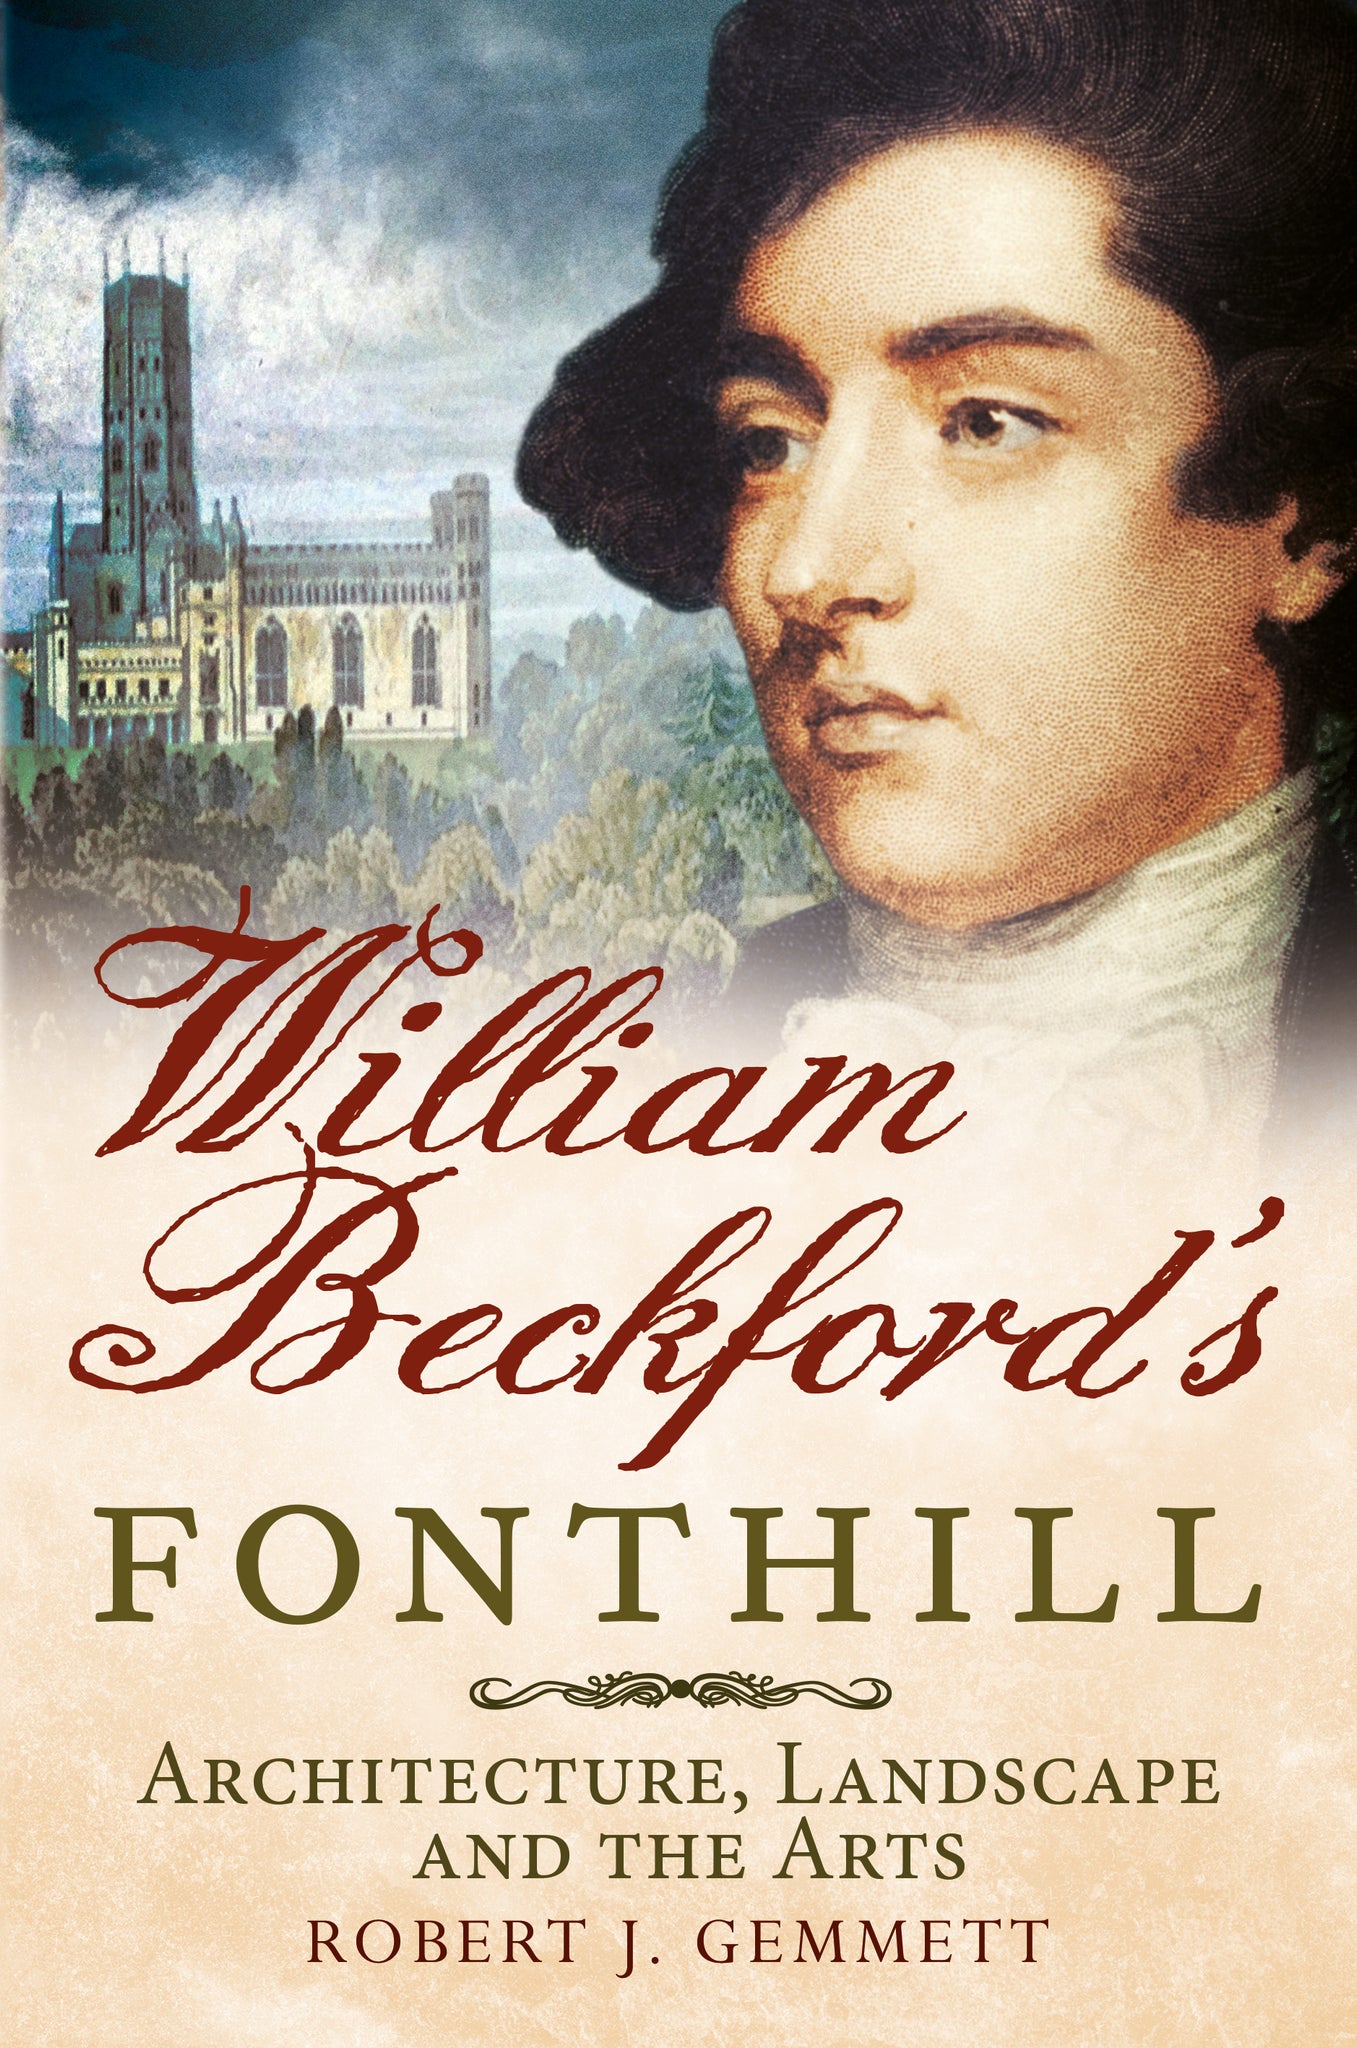 William Beckford's Fonthill: Architecture, Landscape and the Arts